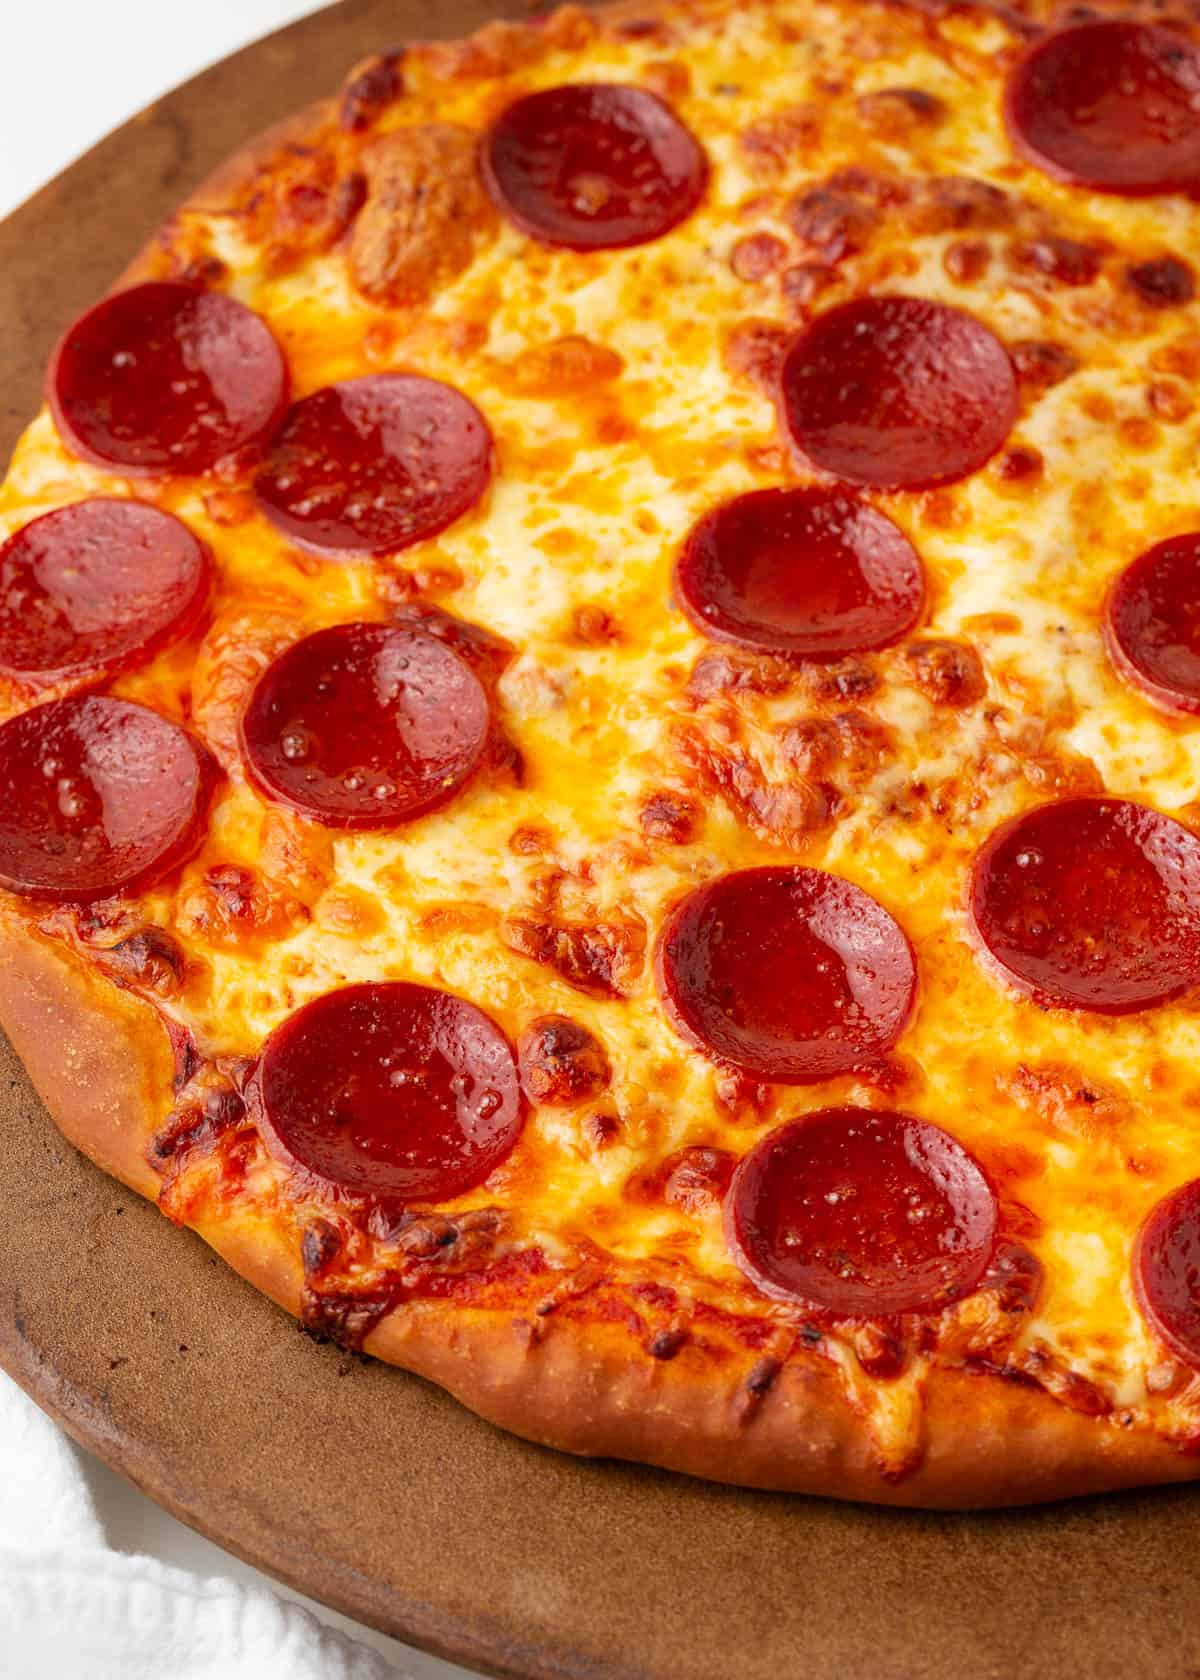 Pepperoni pizza on a pizza stone.